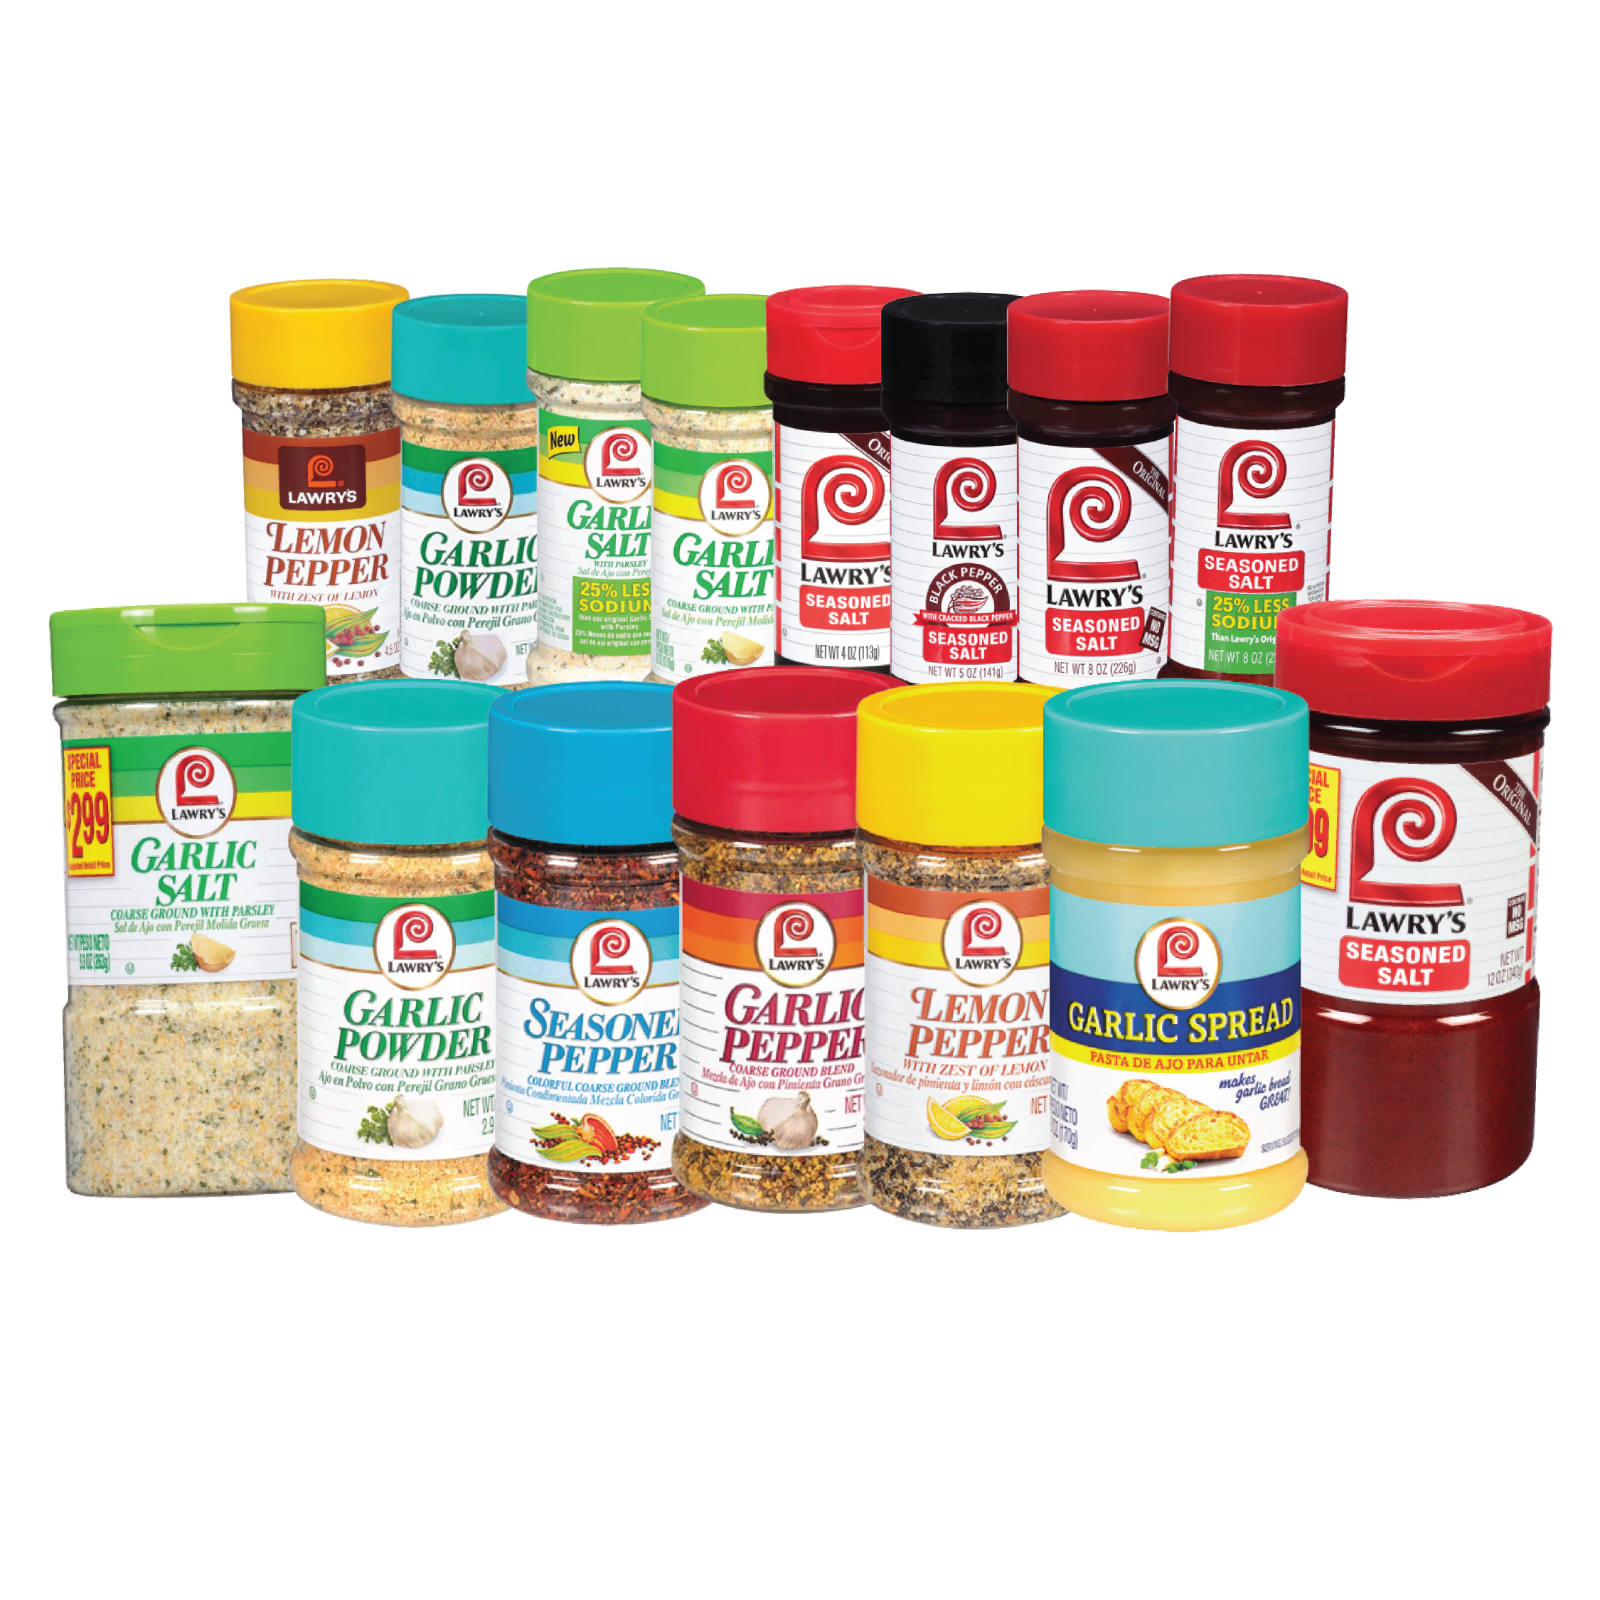 Lawry's Variety Flavor Seasoning Blends | No MSG | Mix & Match 10+ Flavors - $12.10 - $139.56